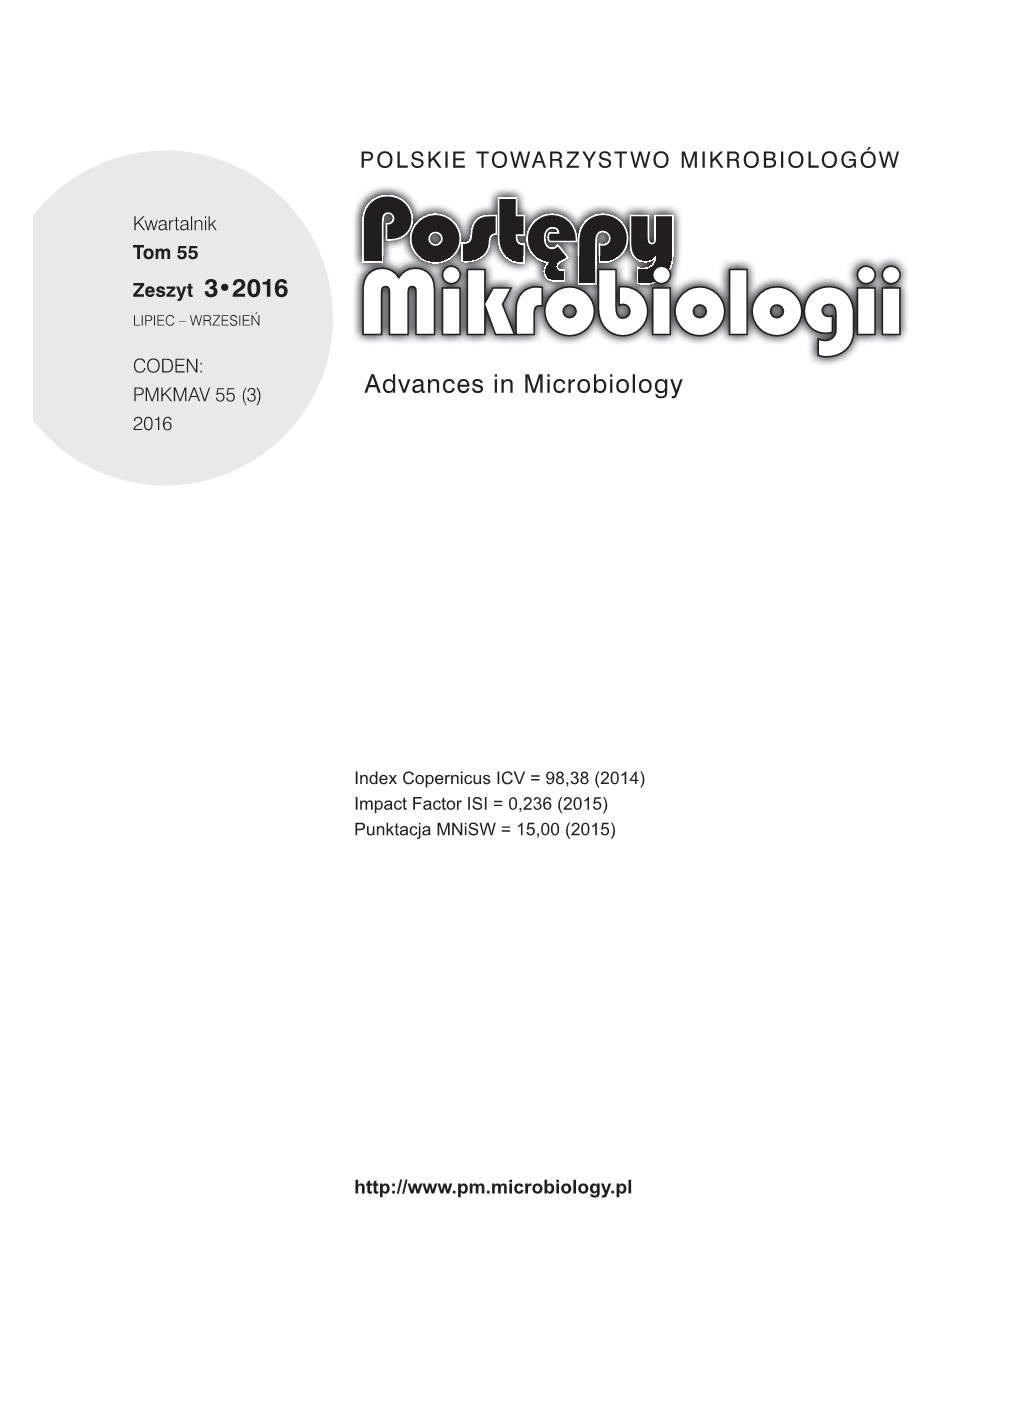 Advances in Microbiology 2016